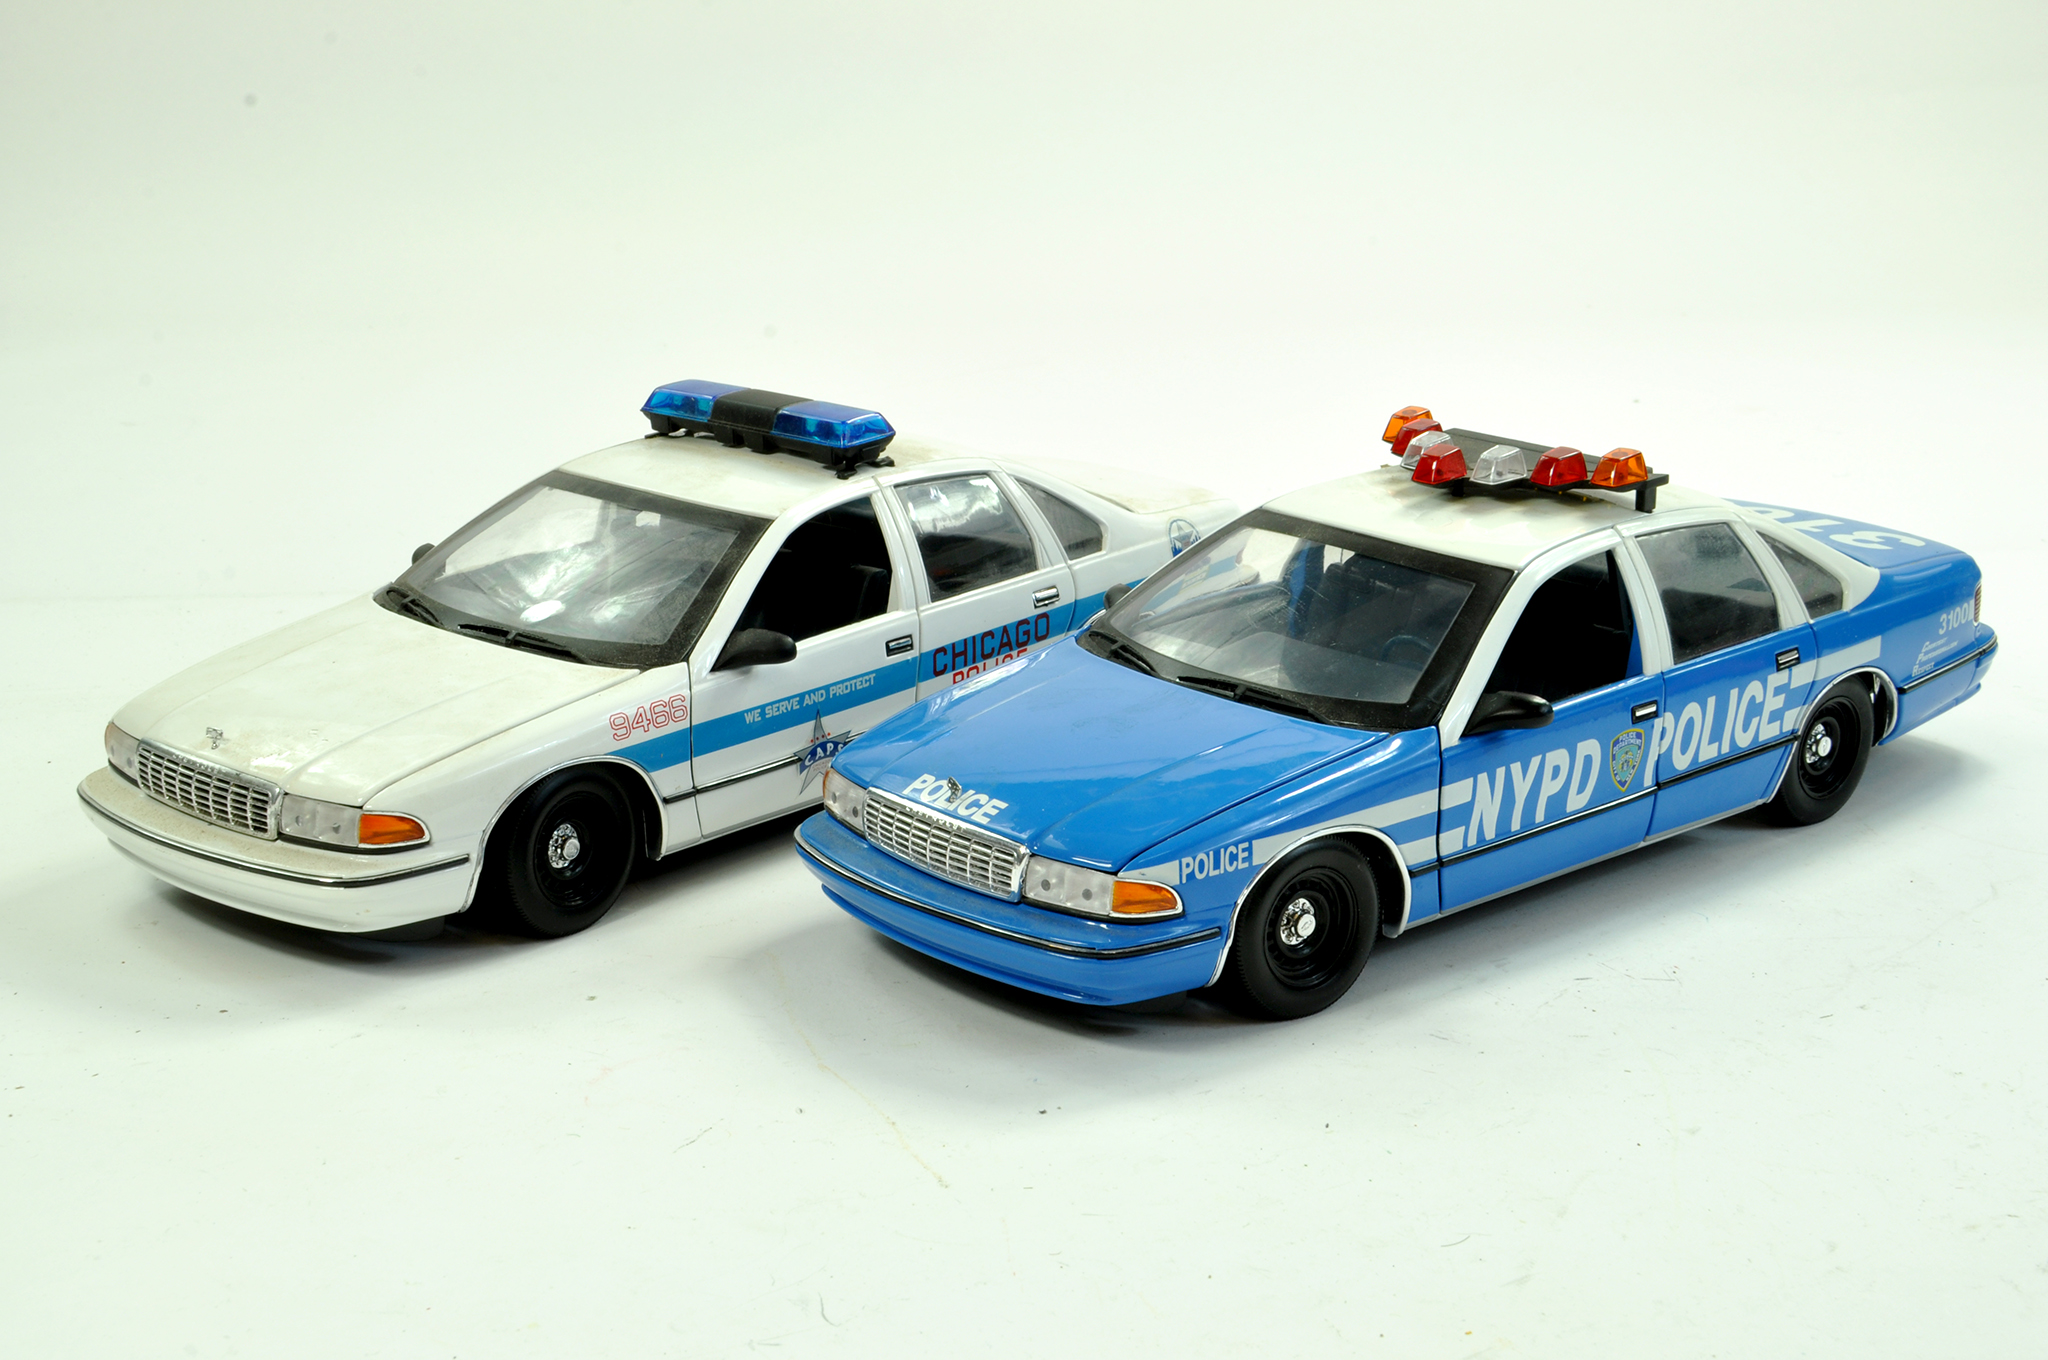 UT Models 1/18 diecast American Police Patrol Cars x 2 comprising Chicago and NYPD issues. Generally